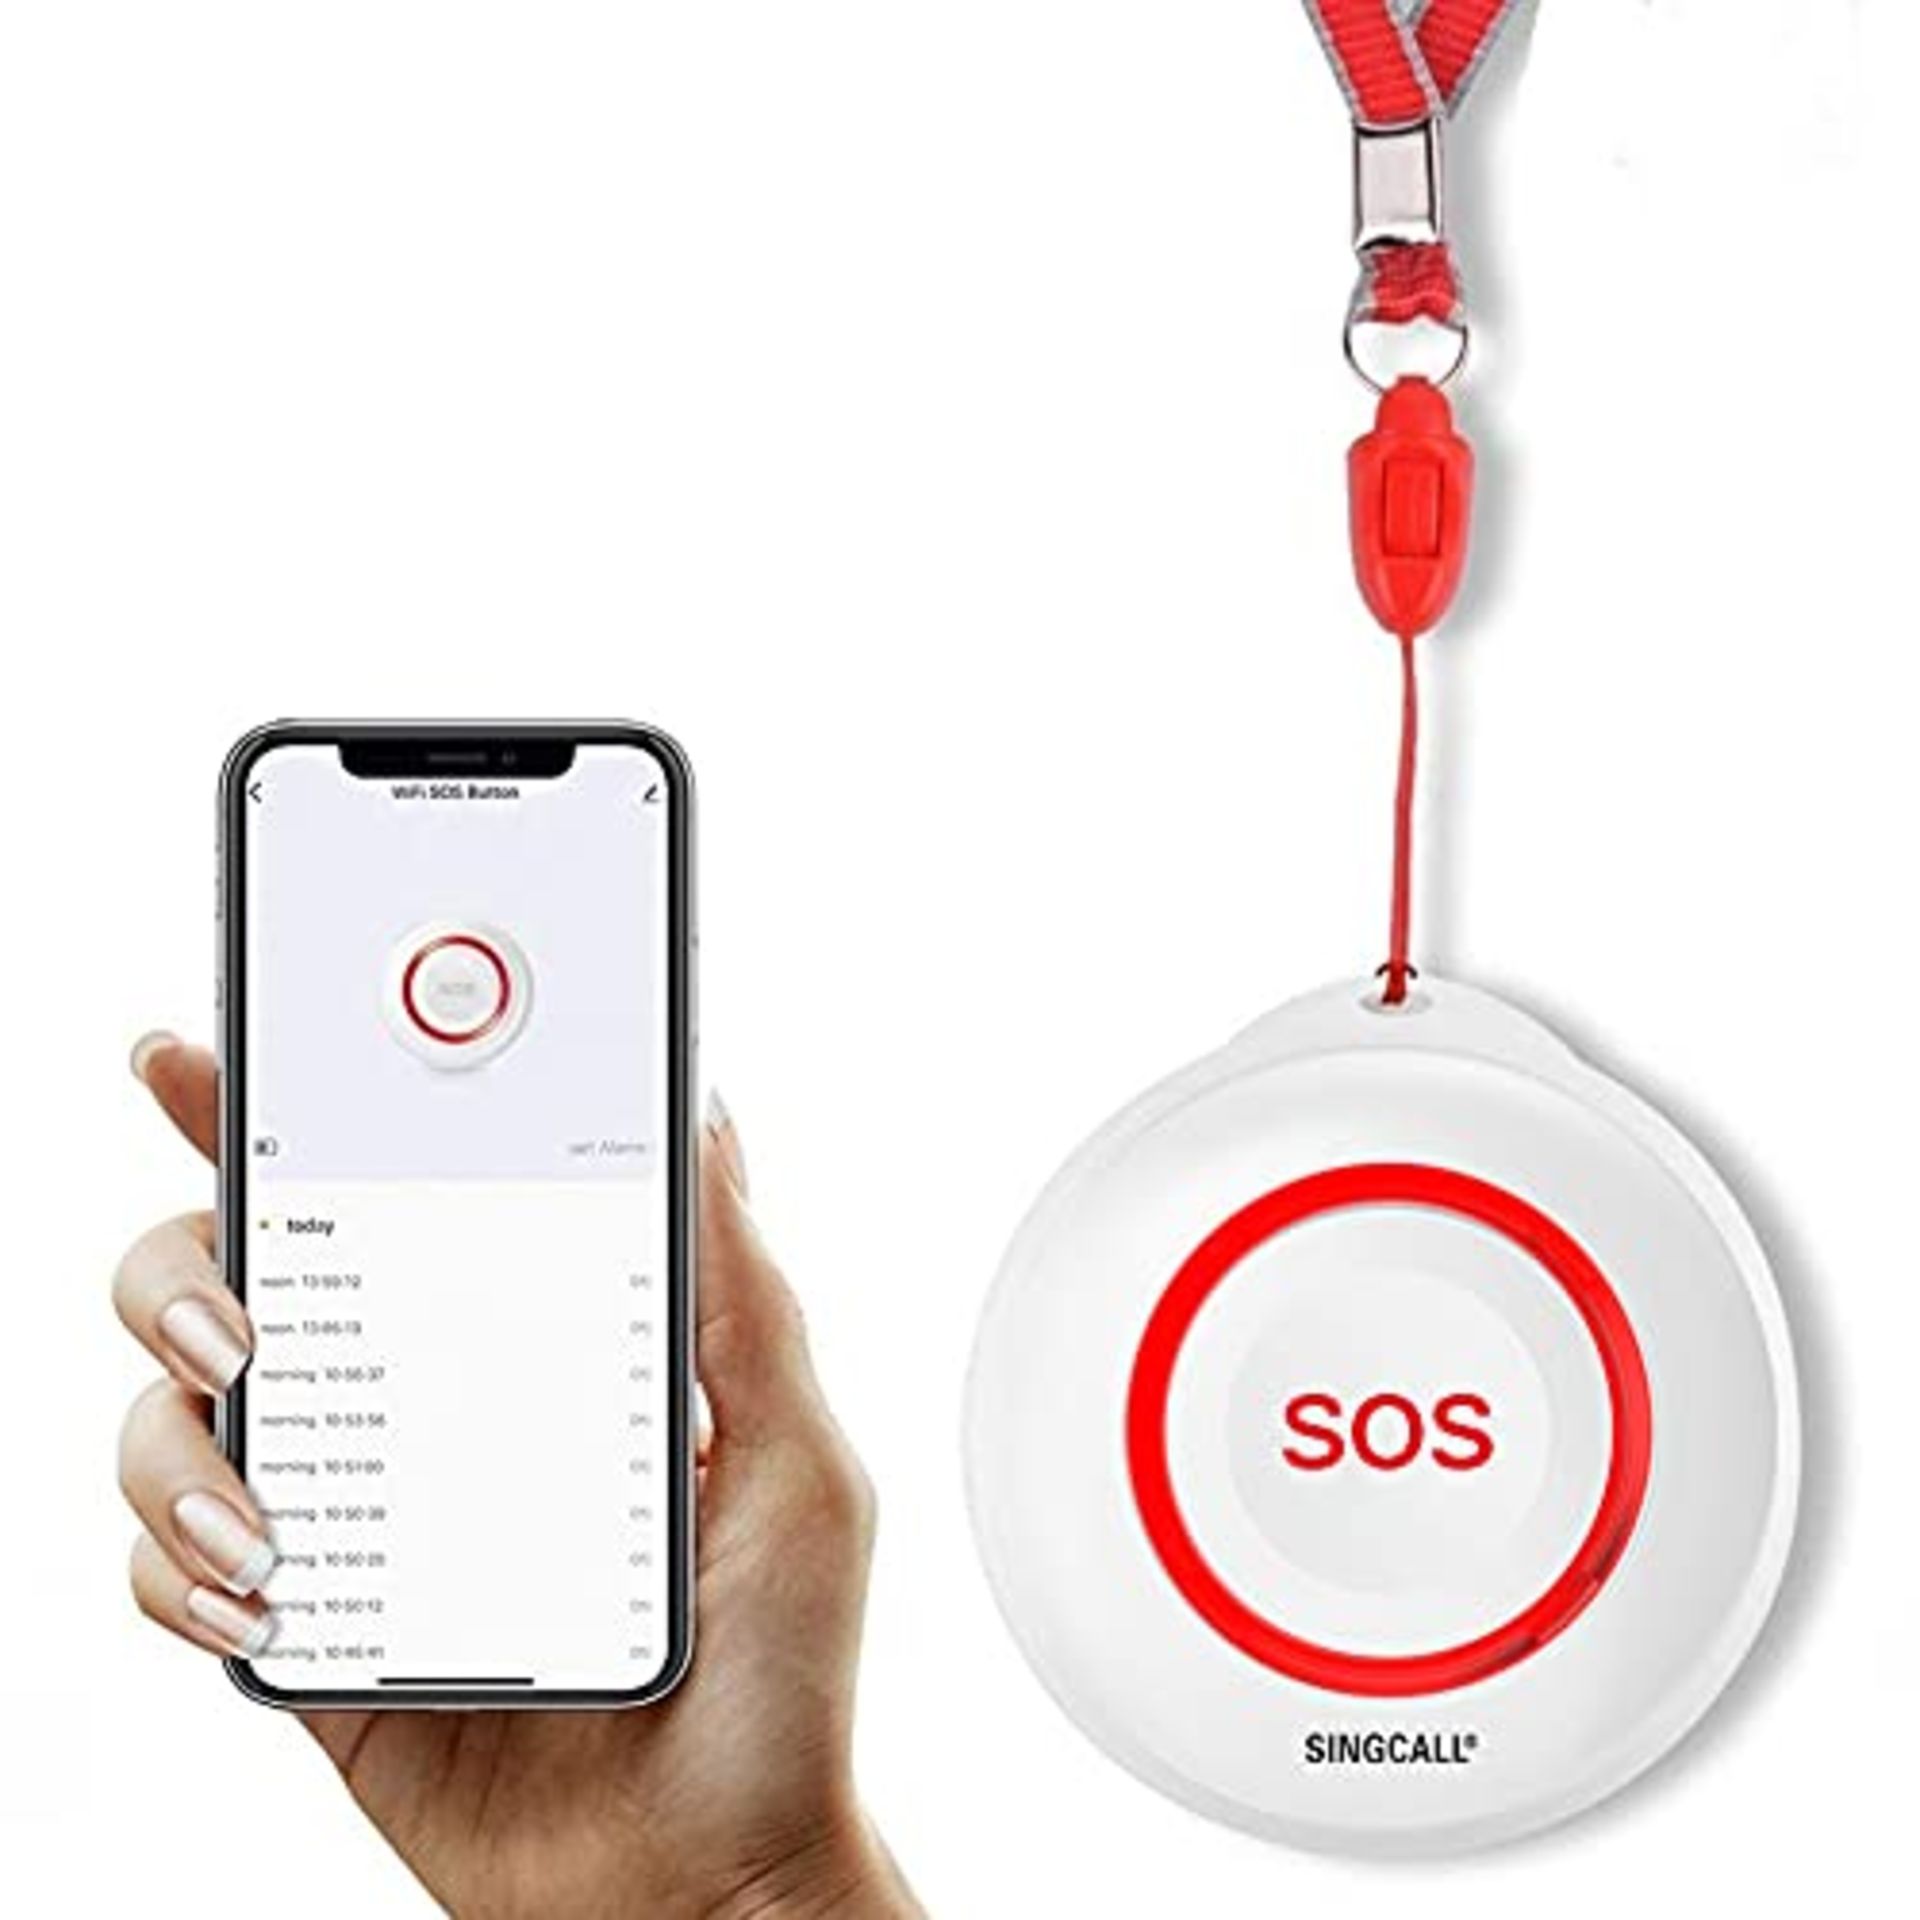 SINGCALL Smart SOS Emergency Button Alarm For Handicapped Caregiver Pager Wireless Nur